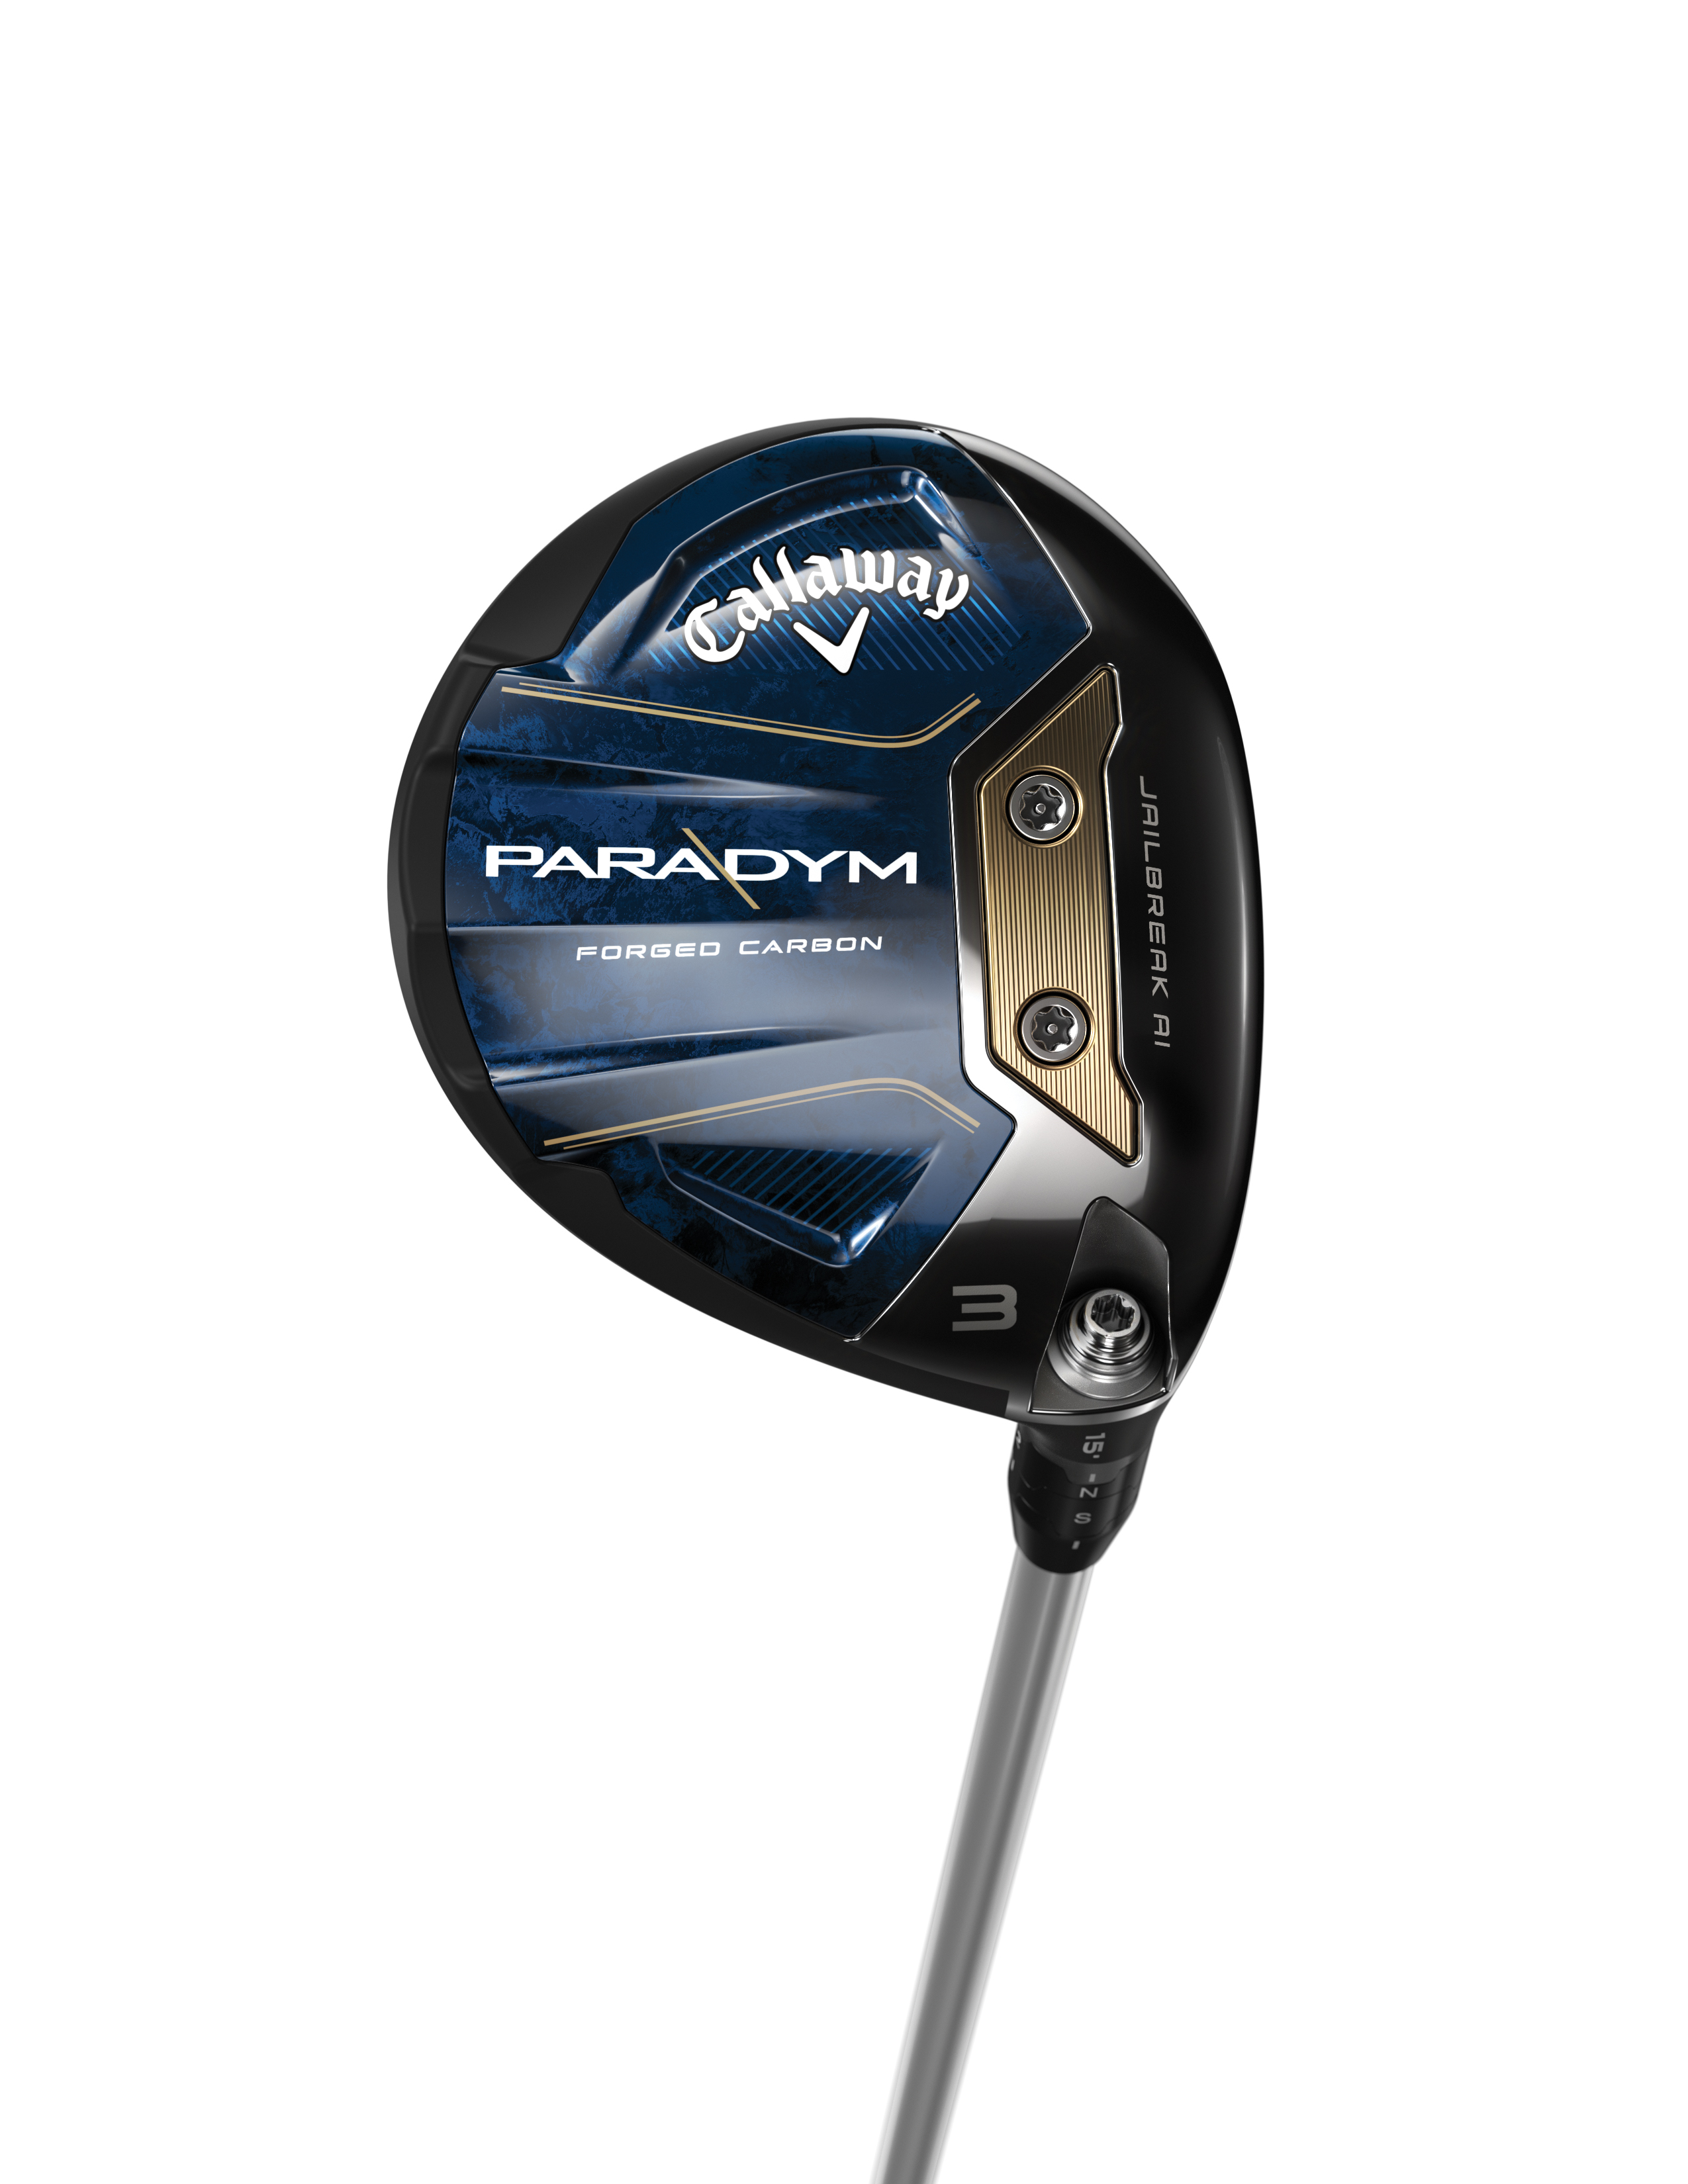 Callaway Paradym fairway woods, hybrids What you need to know Golf Equipment Clubs, Balls, Bags GolfDigest